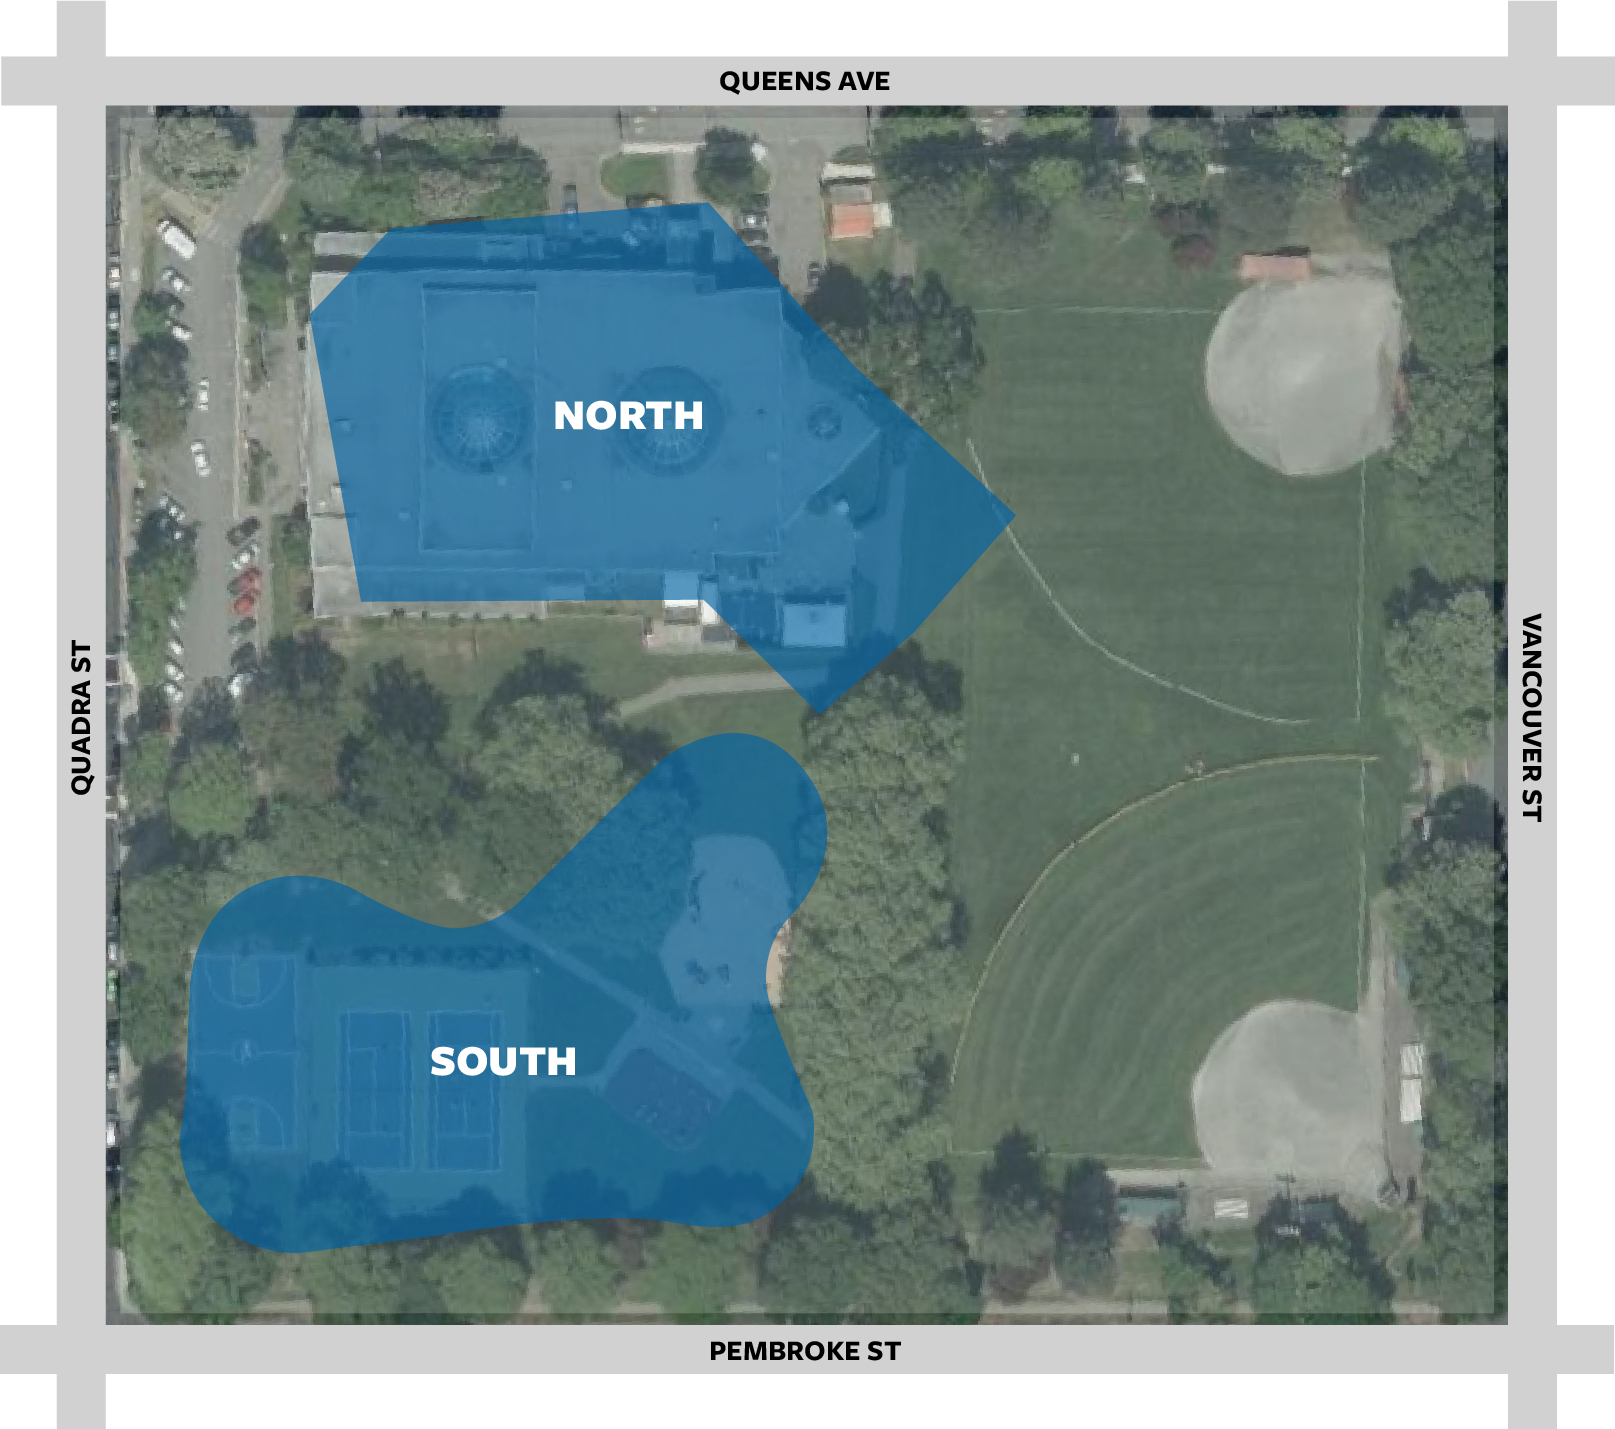 Aerial-view map of Central Park showing two possible locations for the new facility; North in the northwest corners and South in the southwest corner.